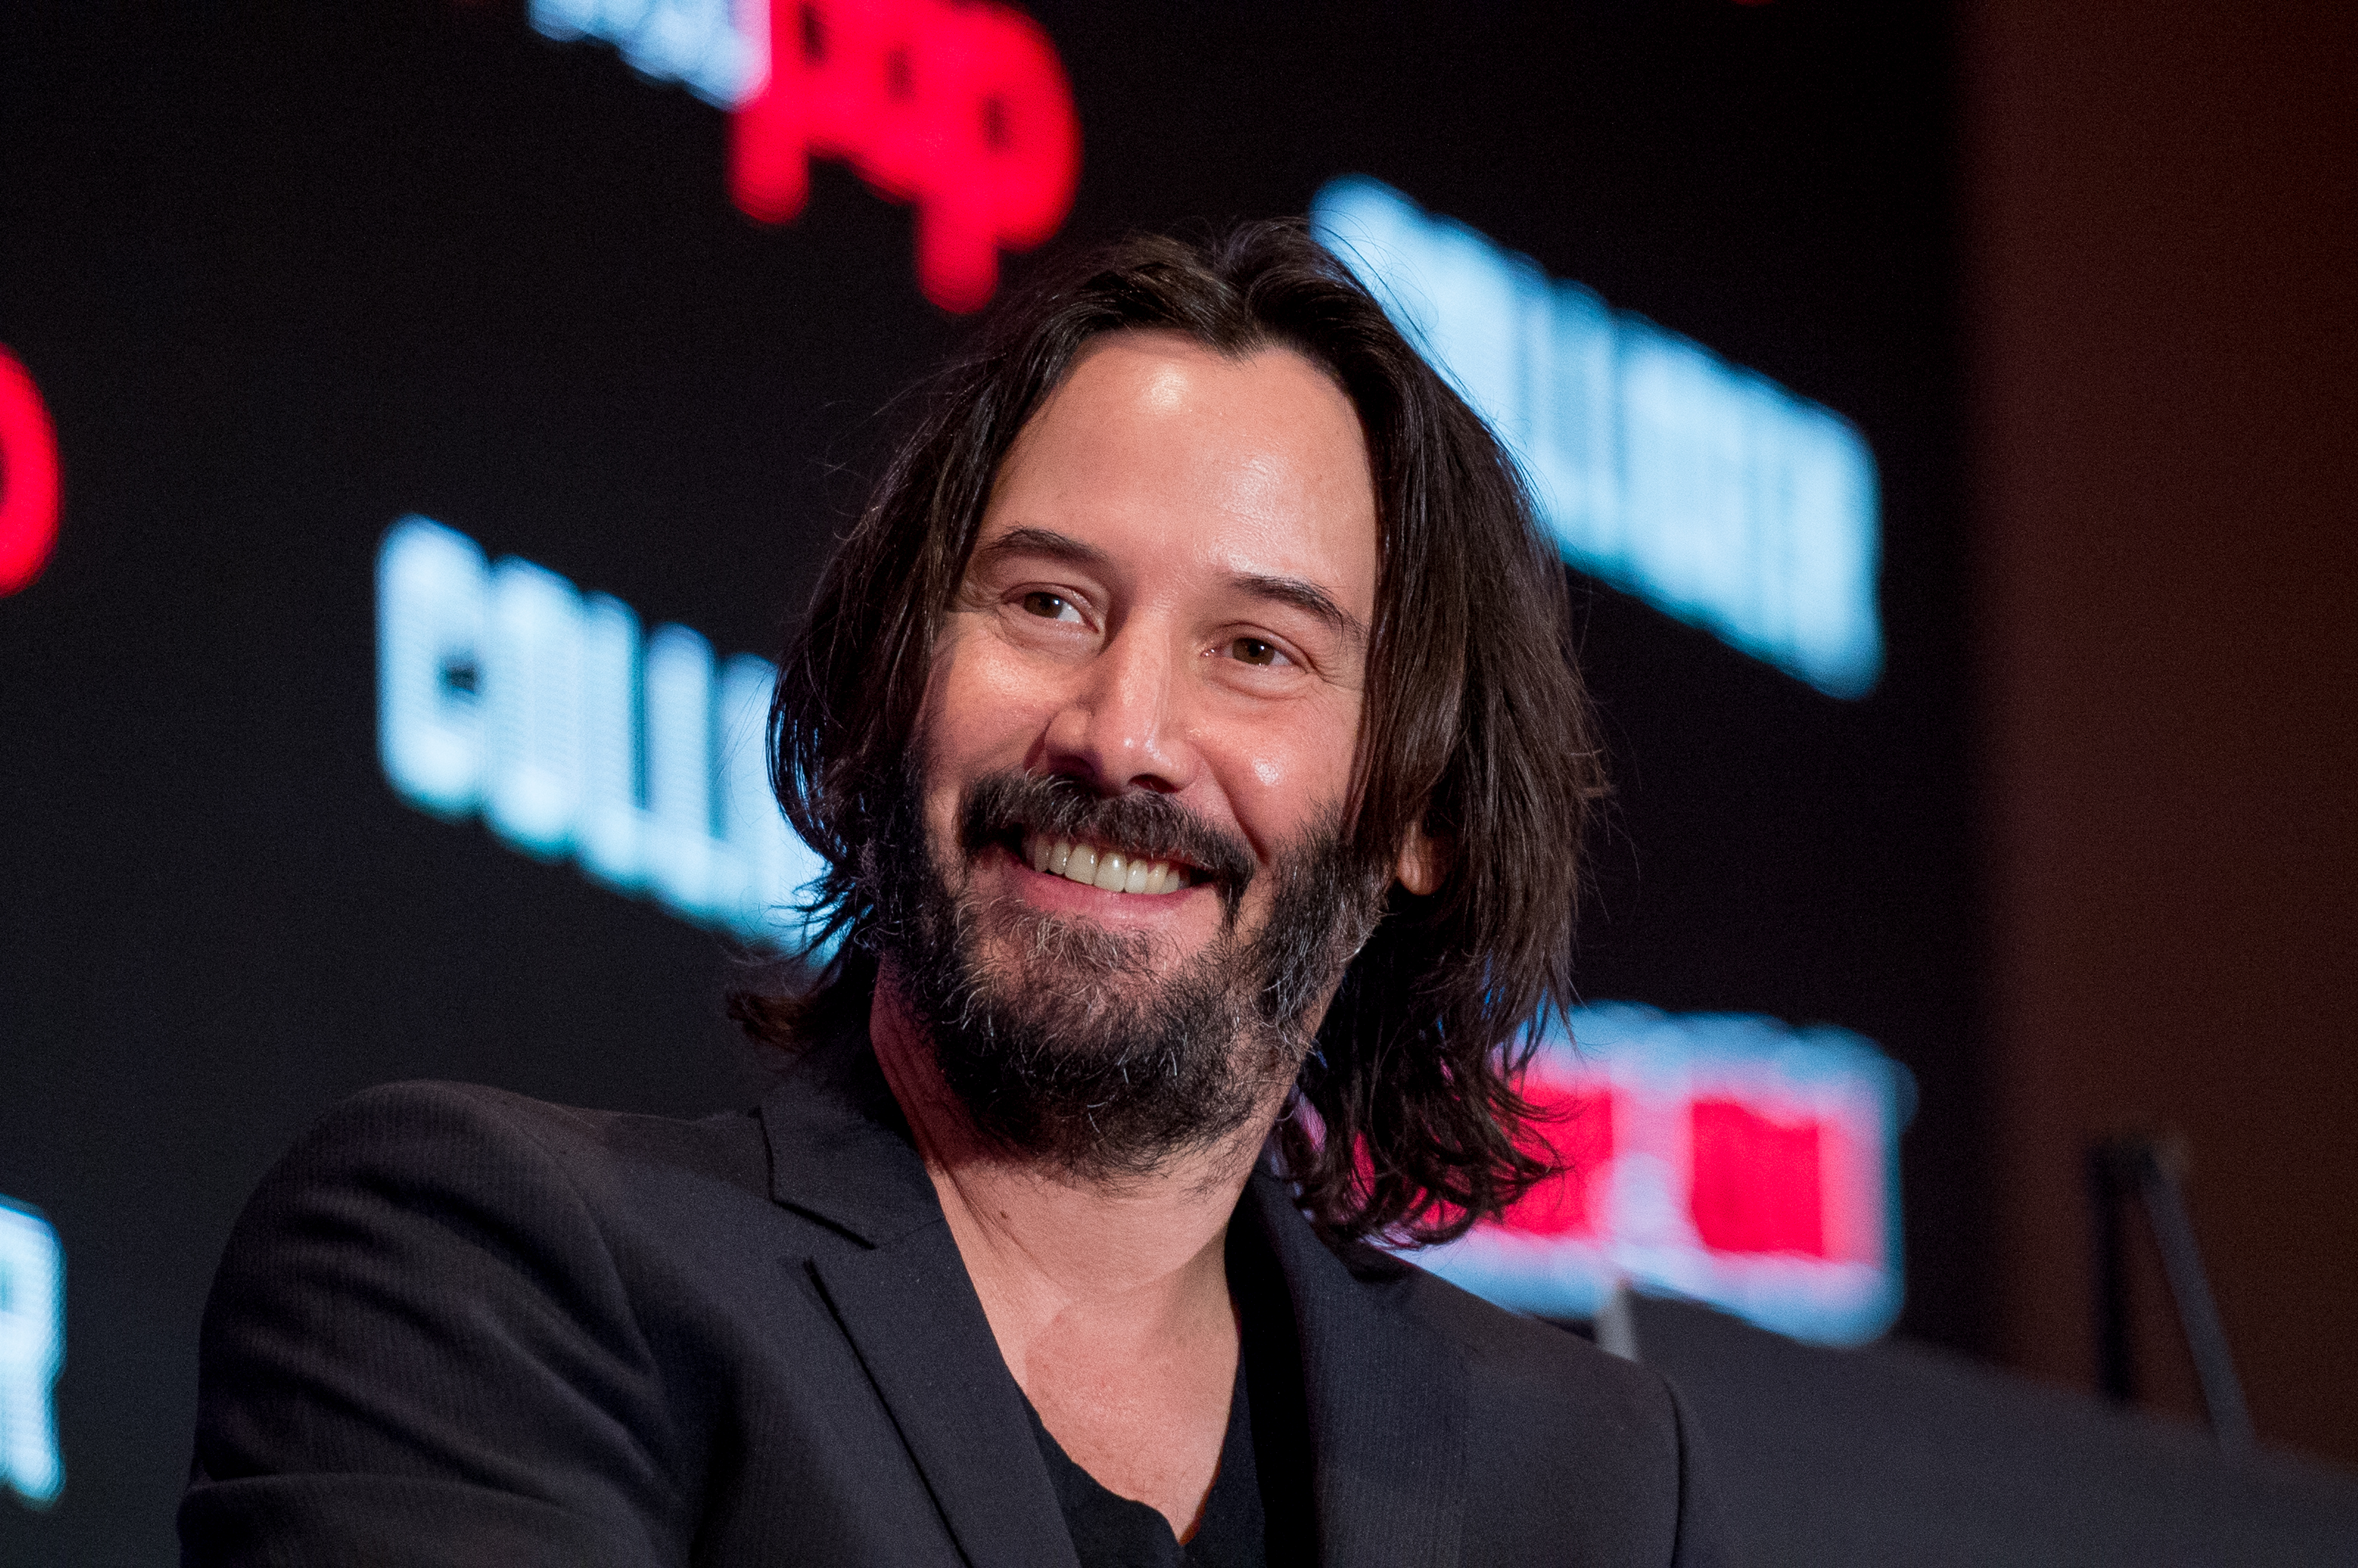 Keanu Reeves during Day 1 of the 2017 New York Comic Con on October 5, 2017 in New York City | Sources: Getty Images